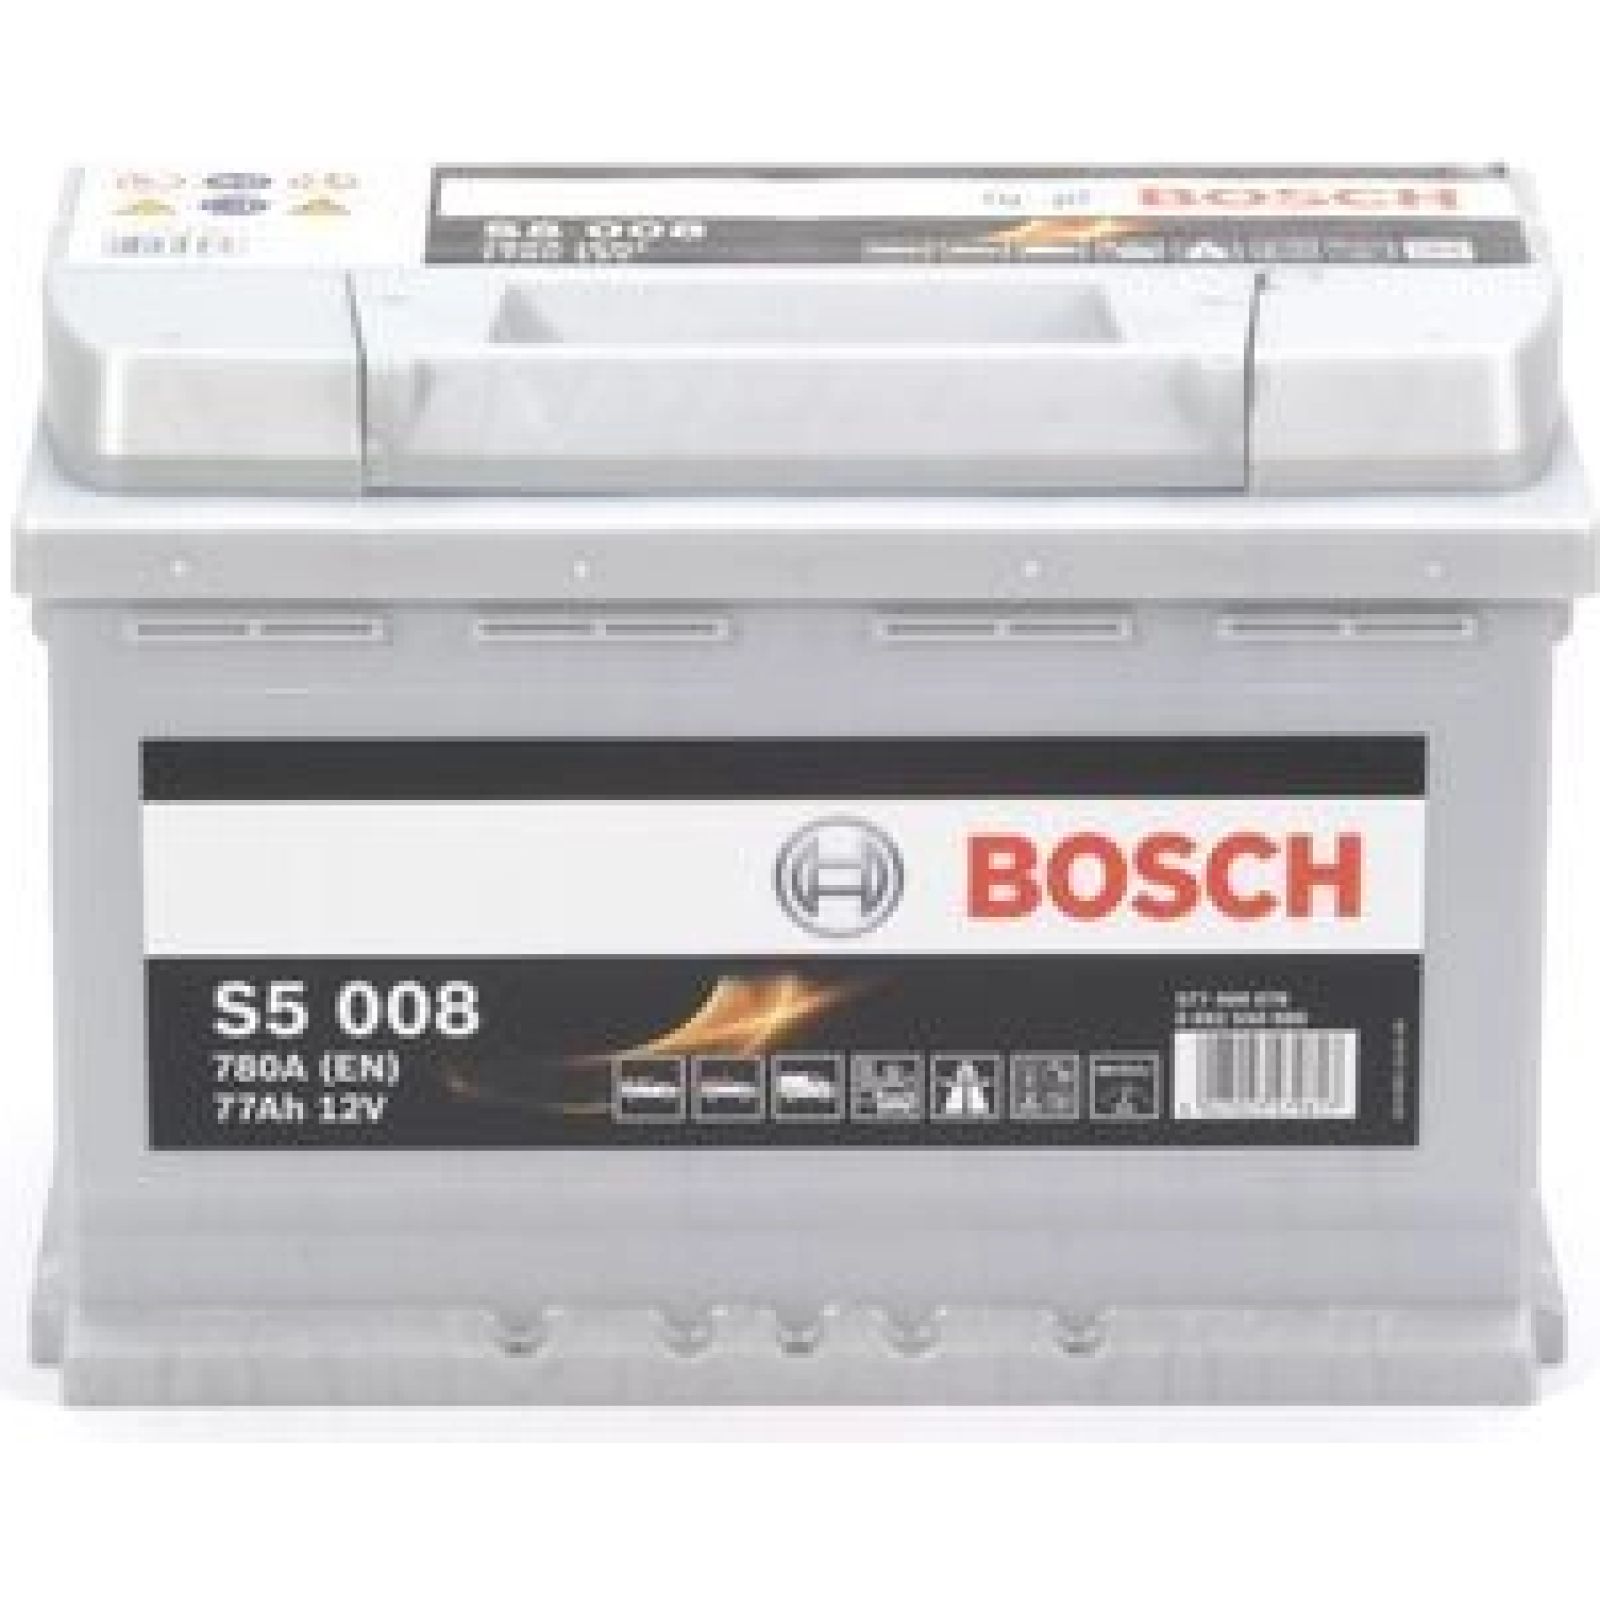 https://www.autoteile-store.at/img/product/s5-008-bosch-pkw-batterie-12v-77ah-780a-0-092-s50-080-62460/1df62a9fe634d99b451c19673f45f4fa_1600.jpg